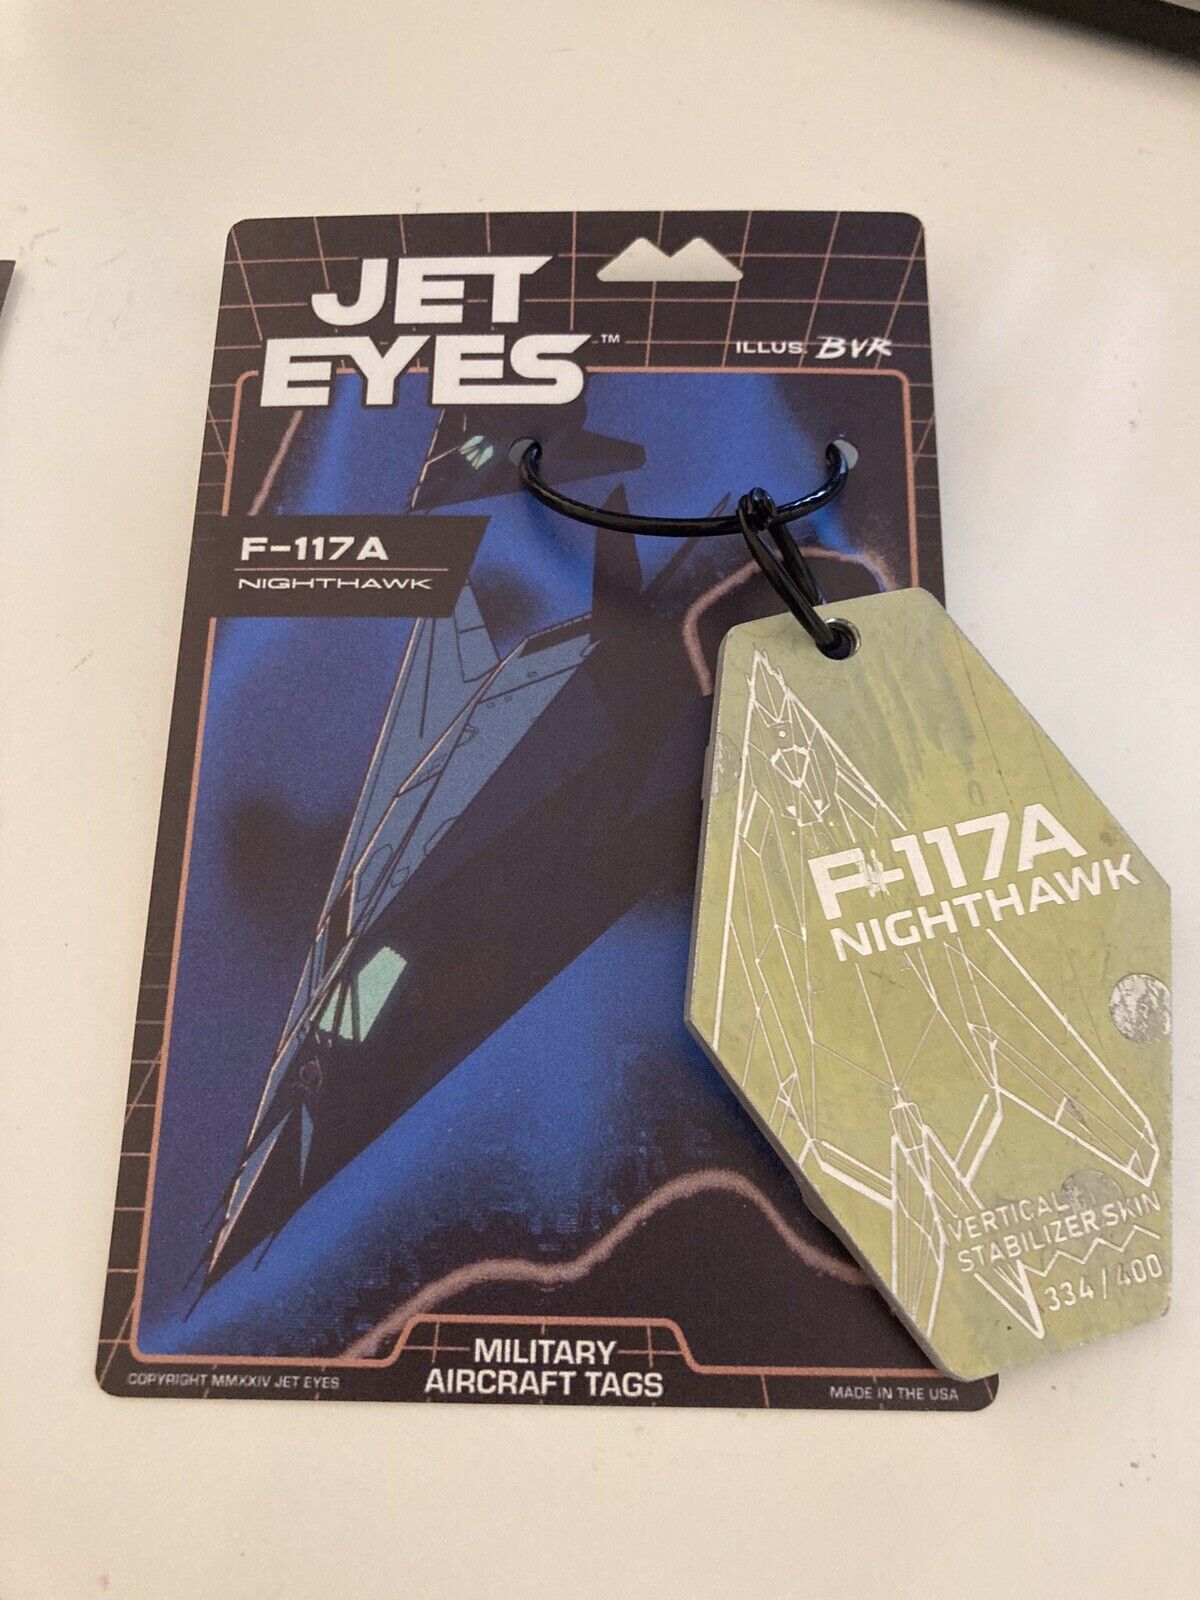 Jet Eyes F-117 Nighthawk Plane Tag, Sold Out On Website